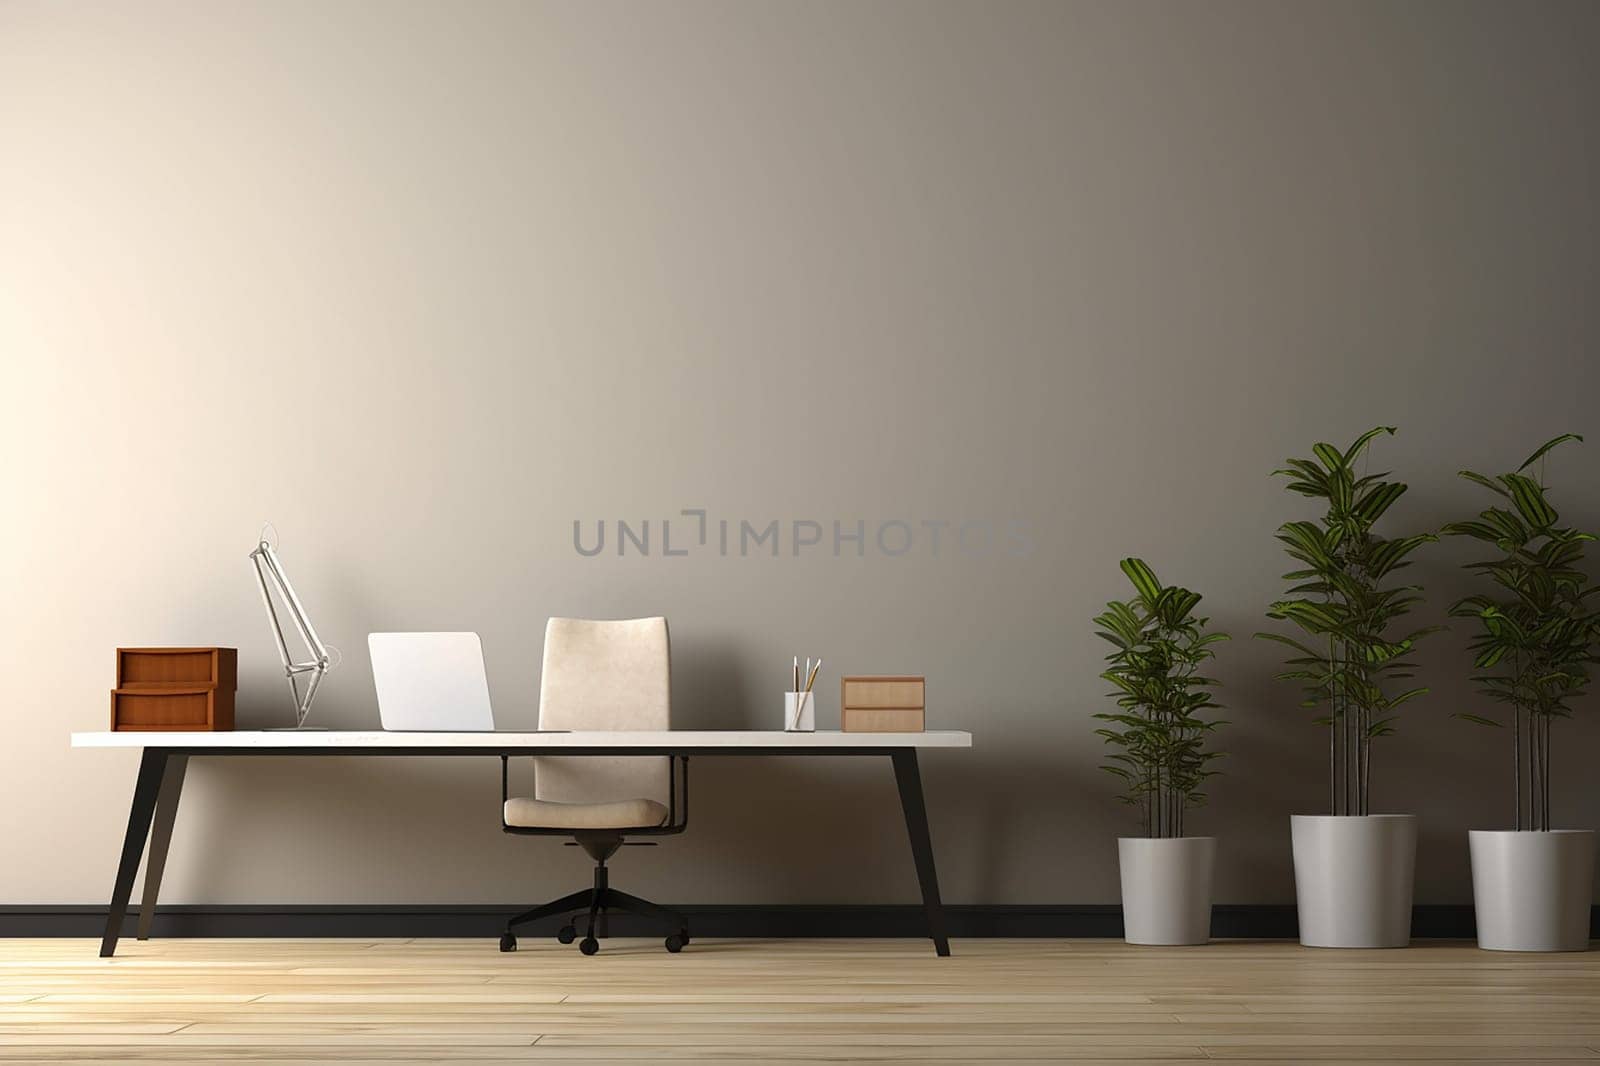 Modern minimalist home office with desk, chair, laptop, decorative plants, and wall art by Hype2art